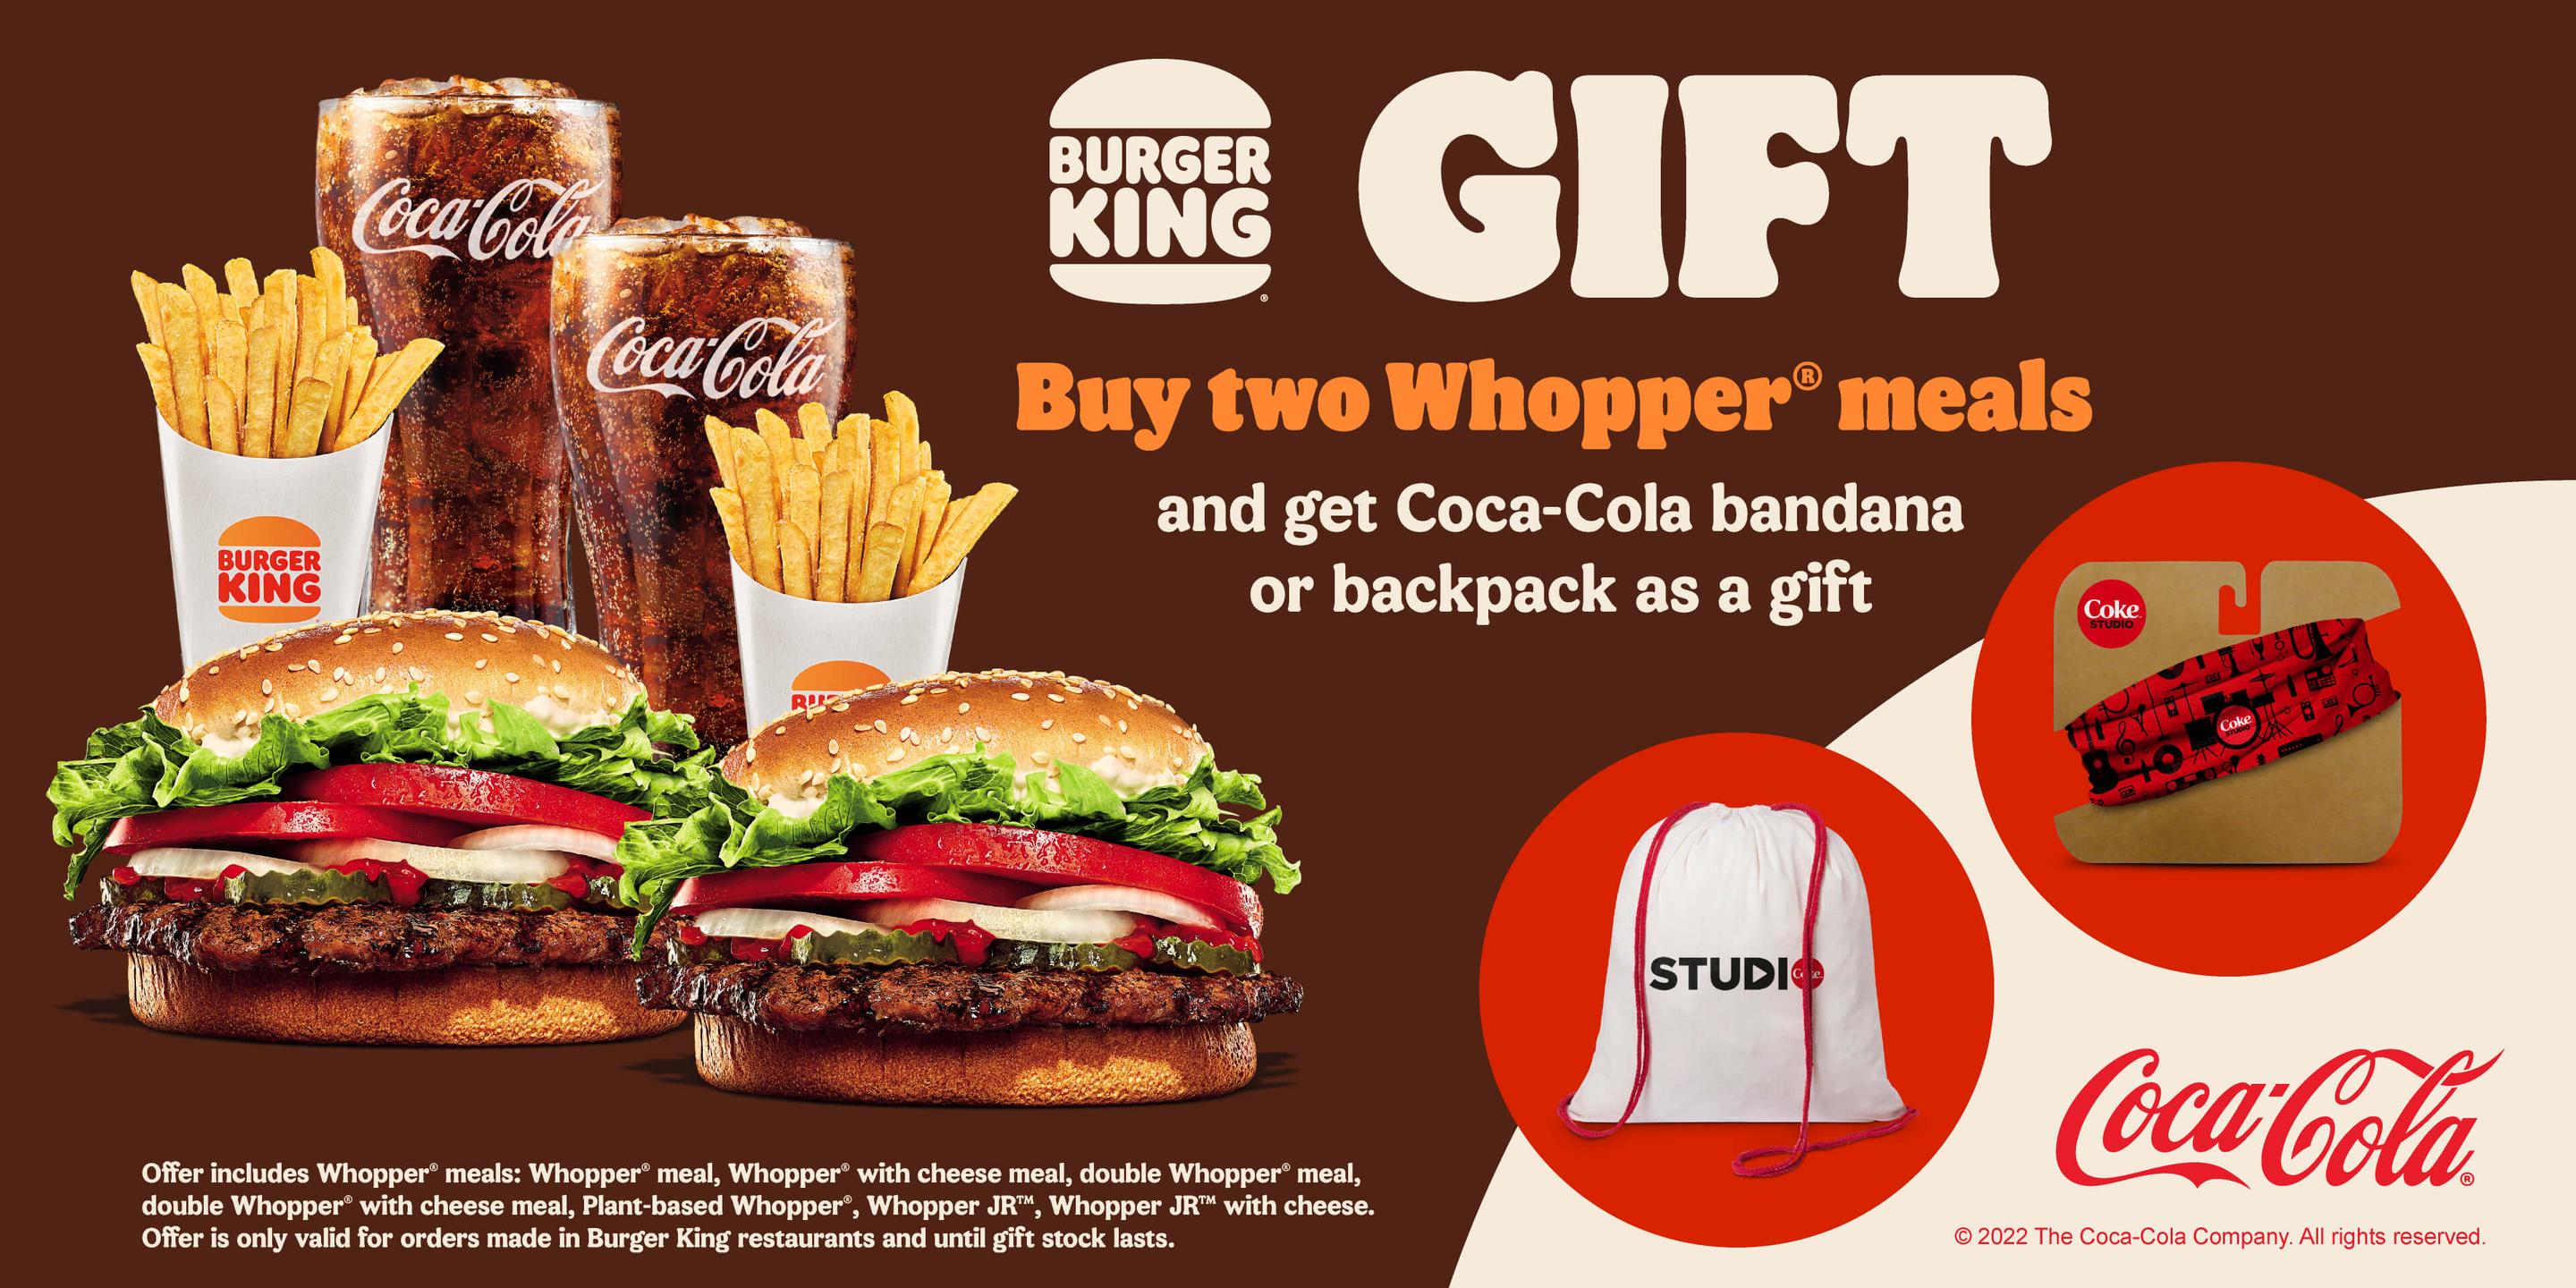 Buy two Whopper® meals and get Coca-Cola bandana or backpack as a gift!